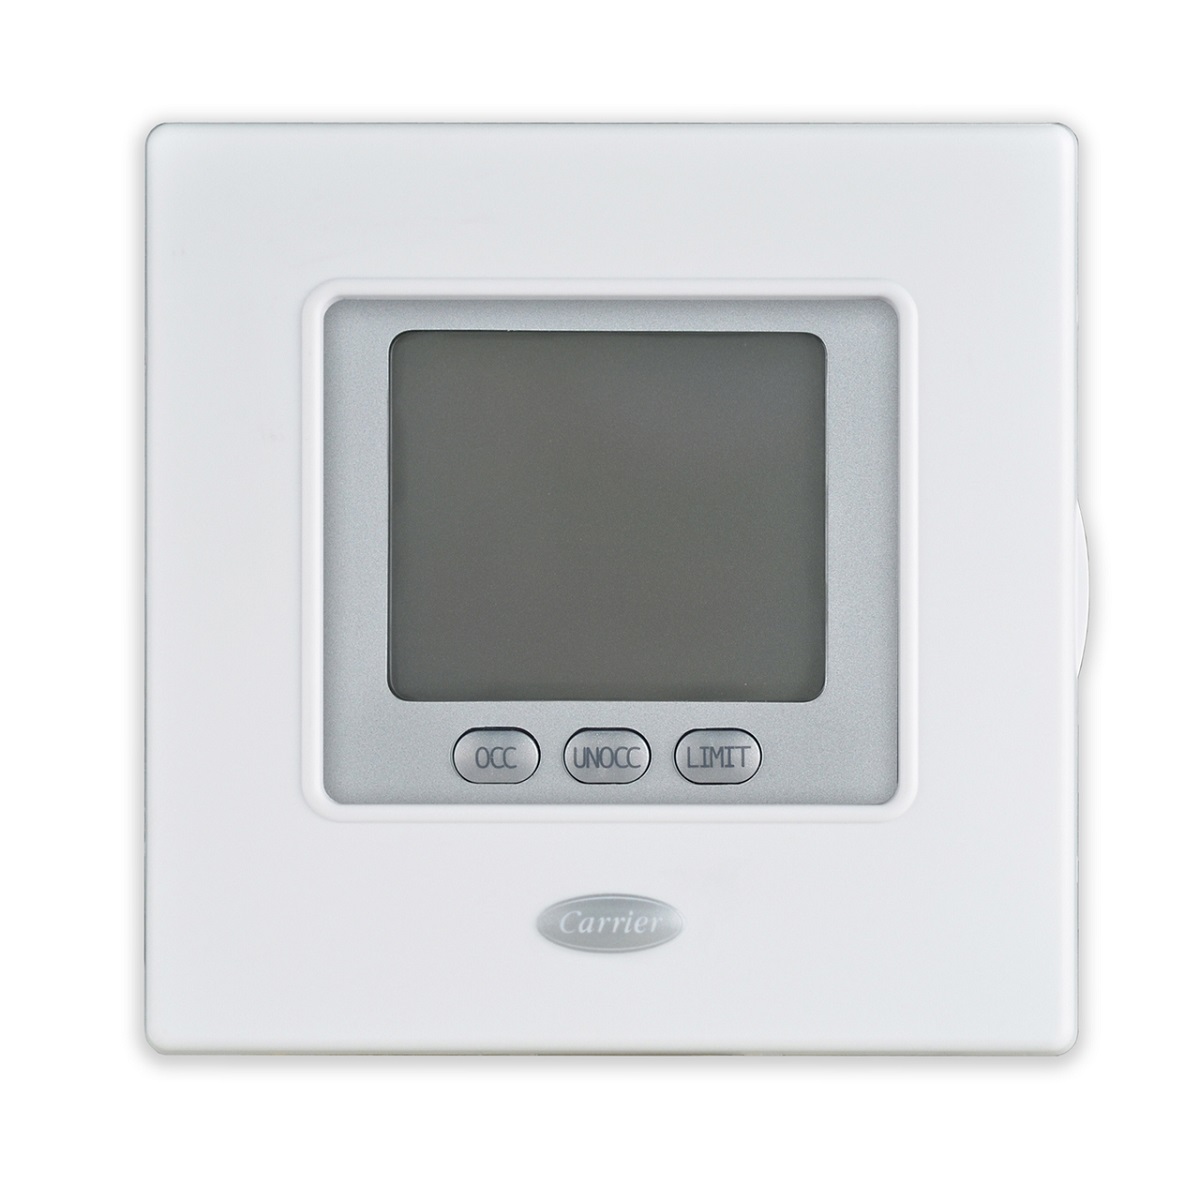 12-amazing-carrier-thermostats-for-home-for-2023